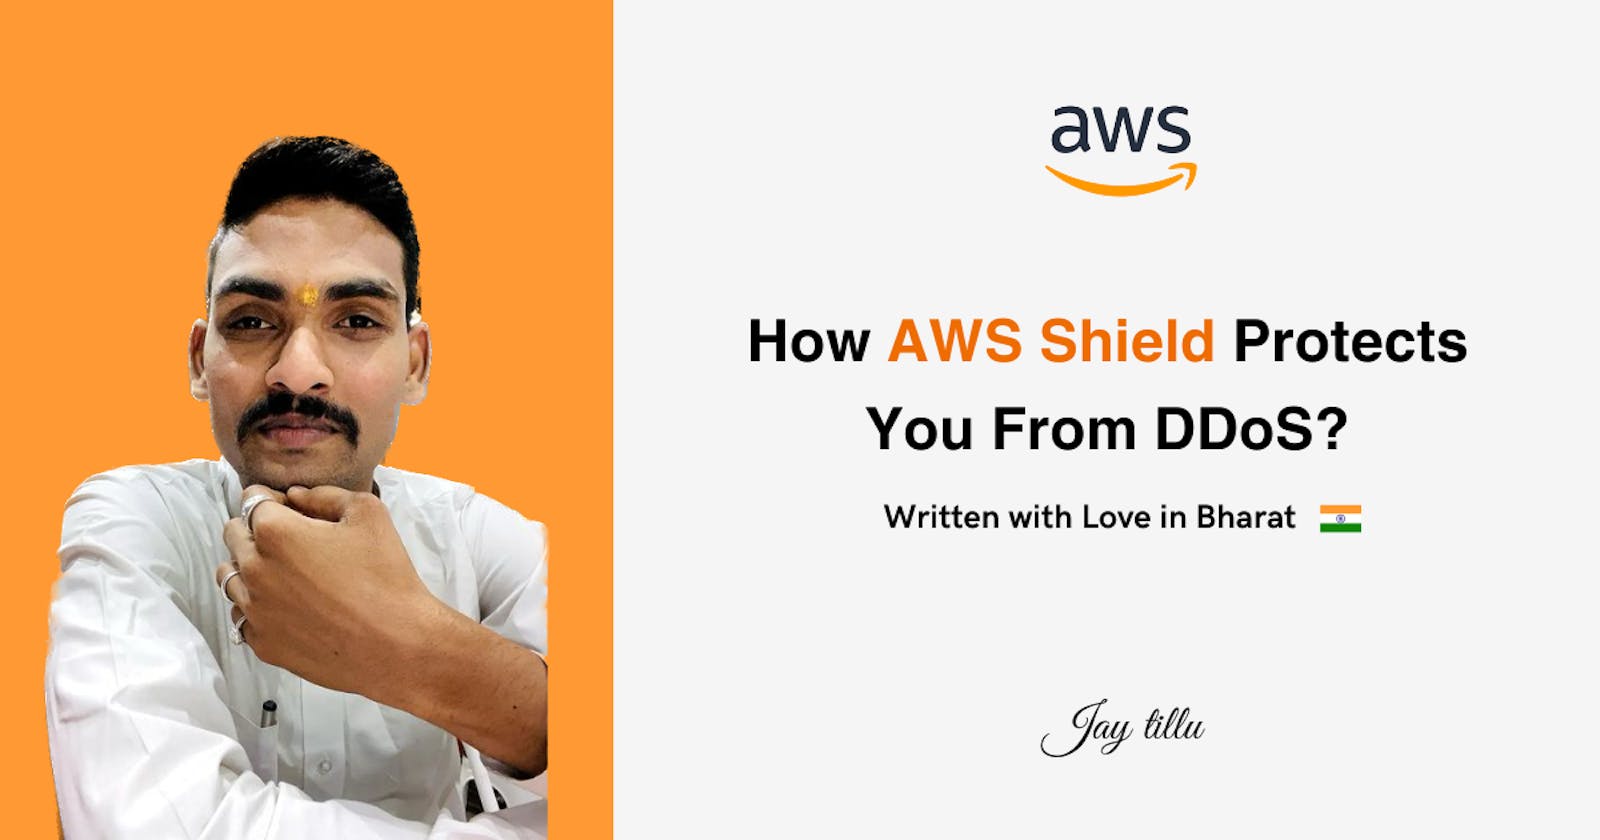 How AWS Shield Protects You From DDoS?